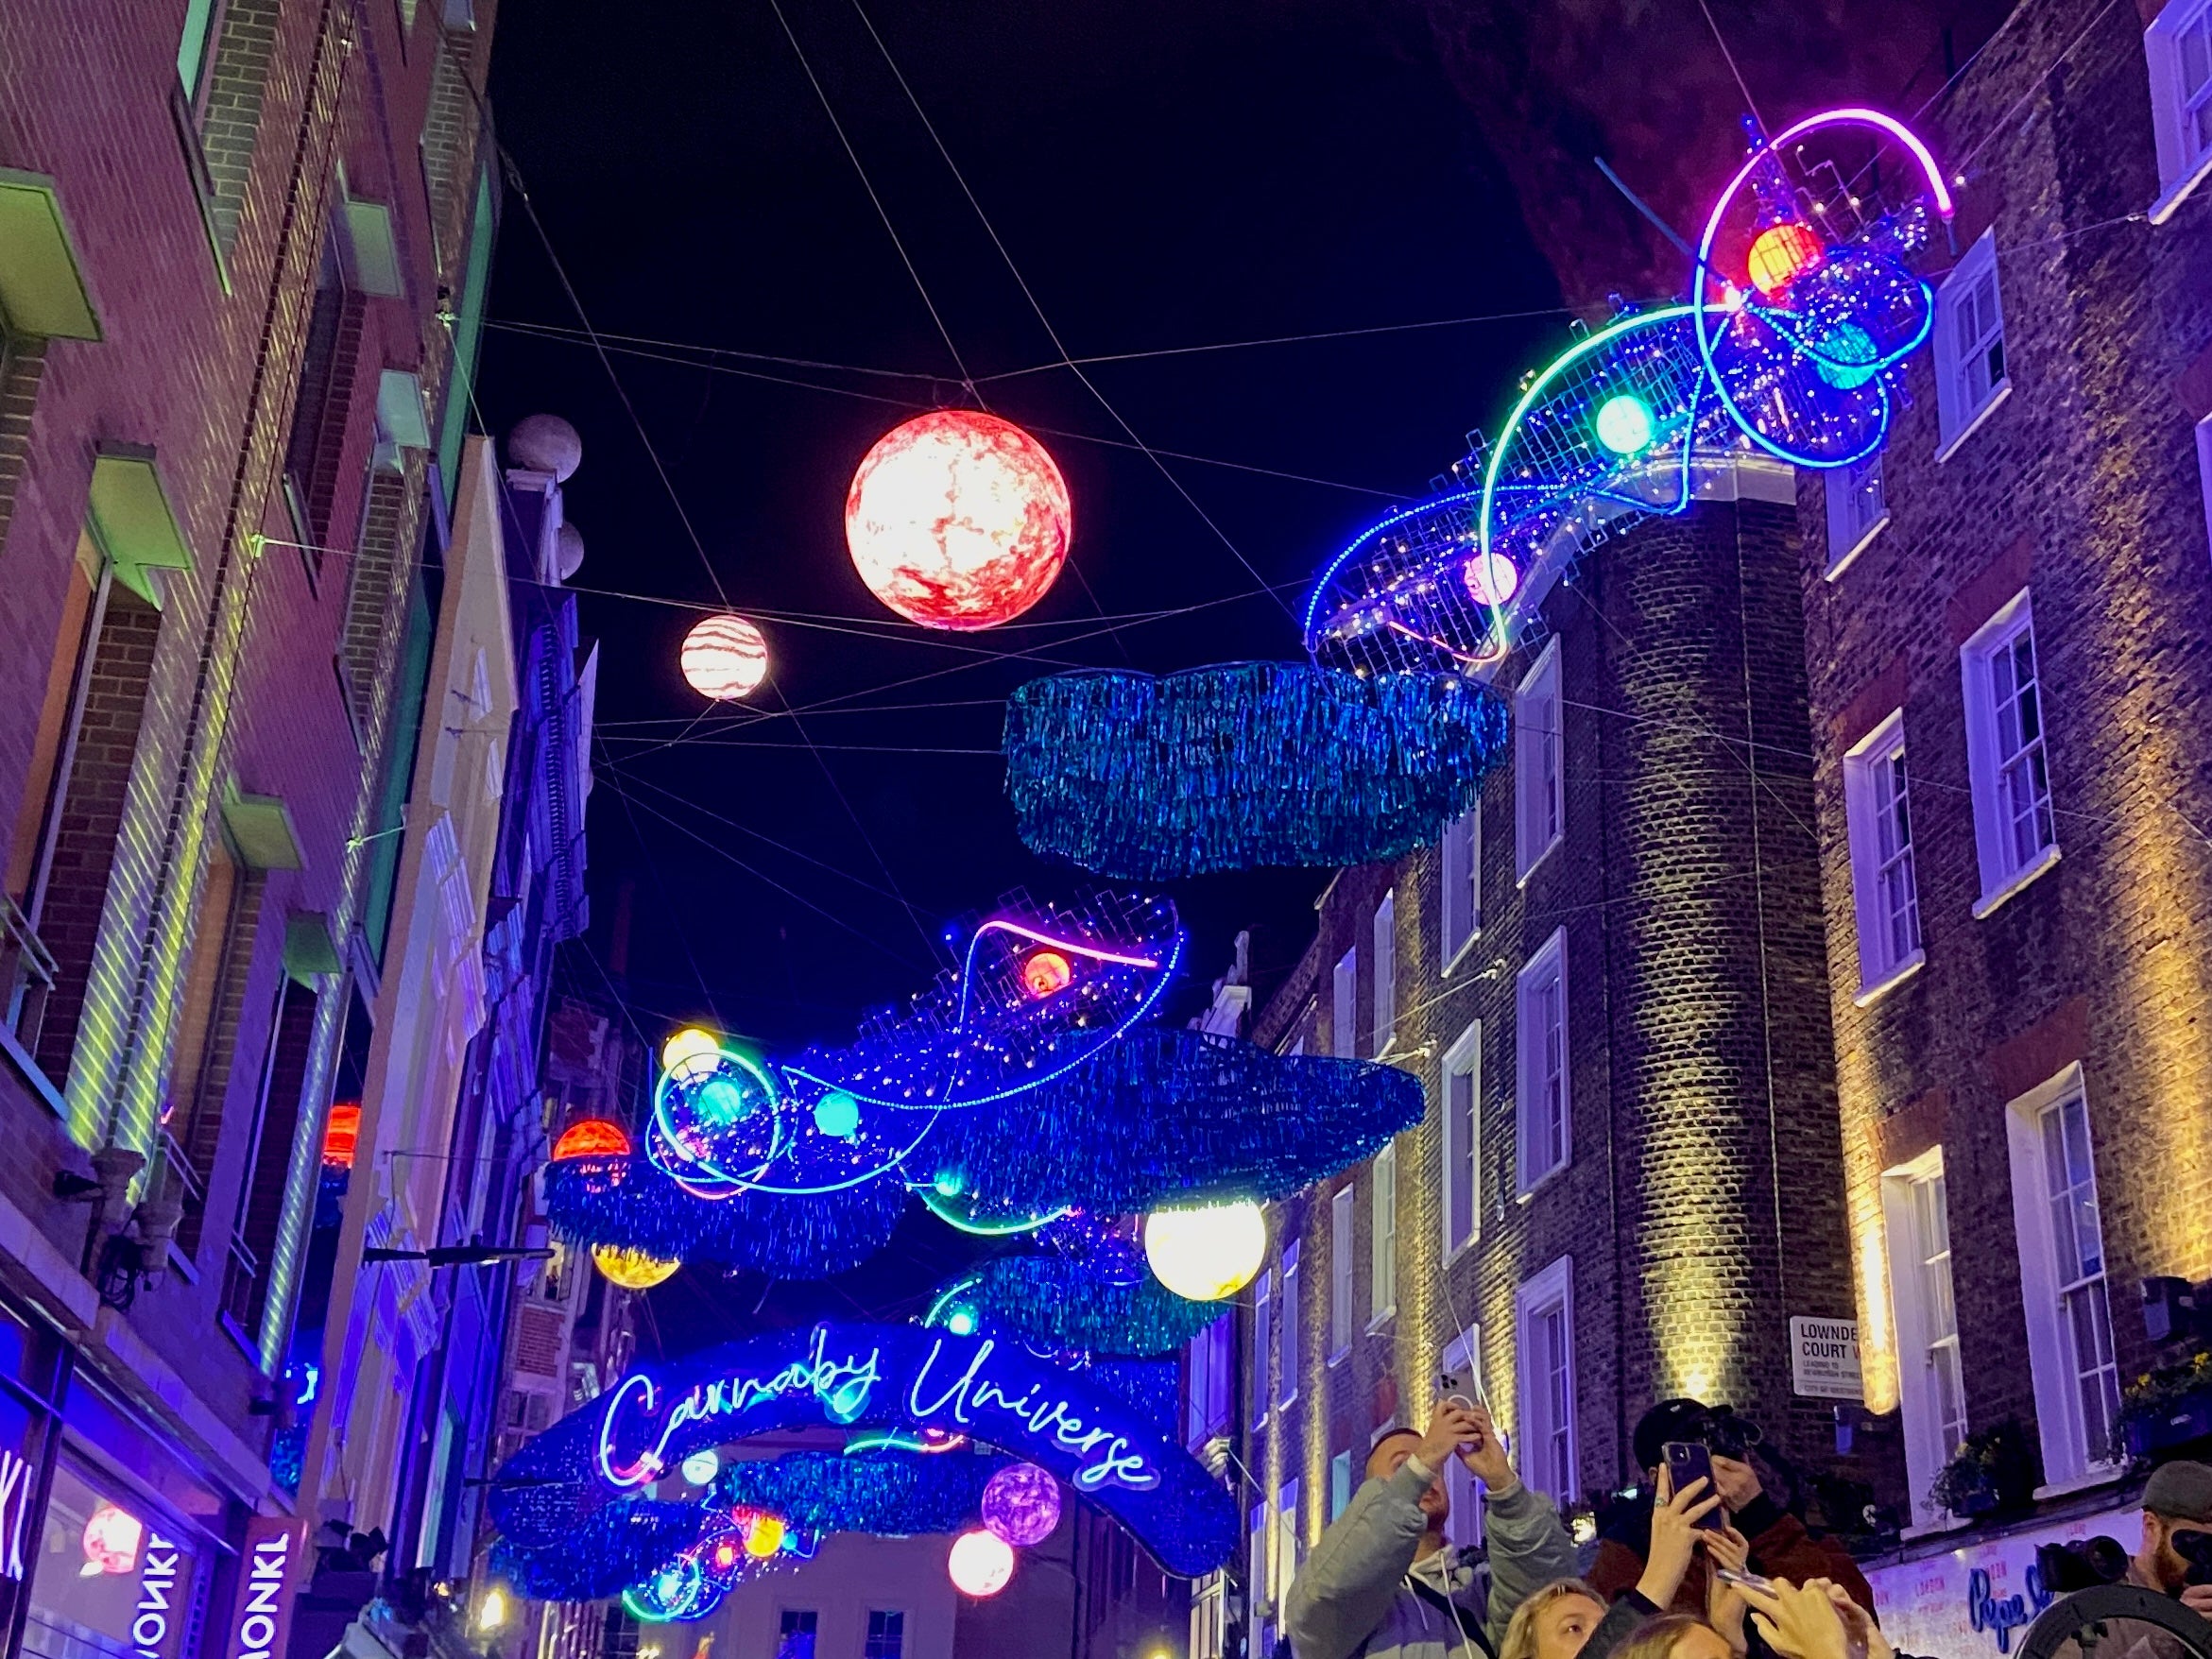 This year Carnaby Street has a whole solar system of lights overhead